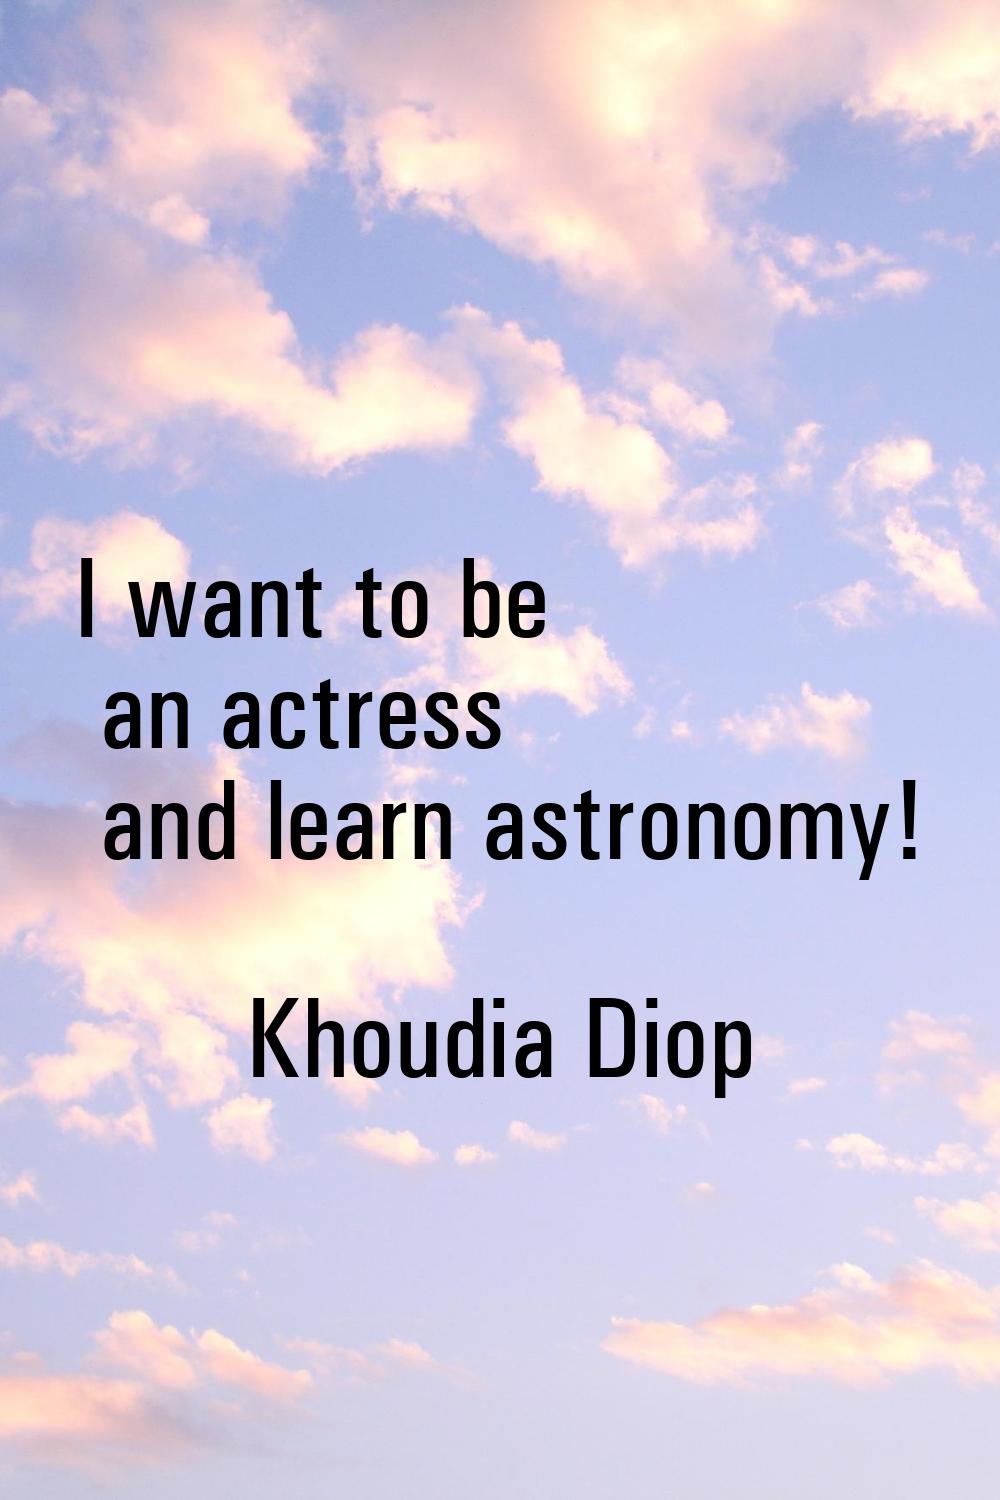 I want to be an actress and learn astronomy!